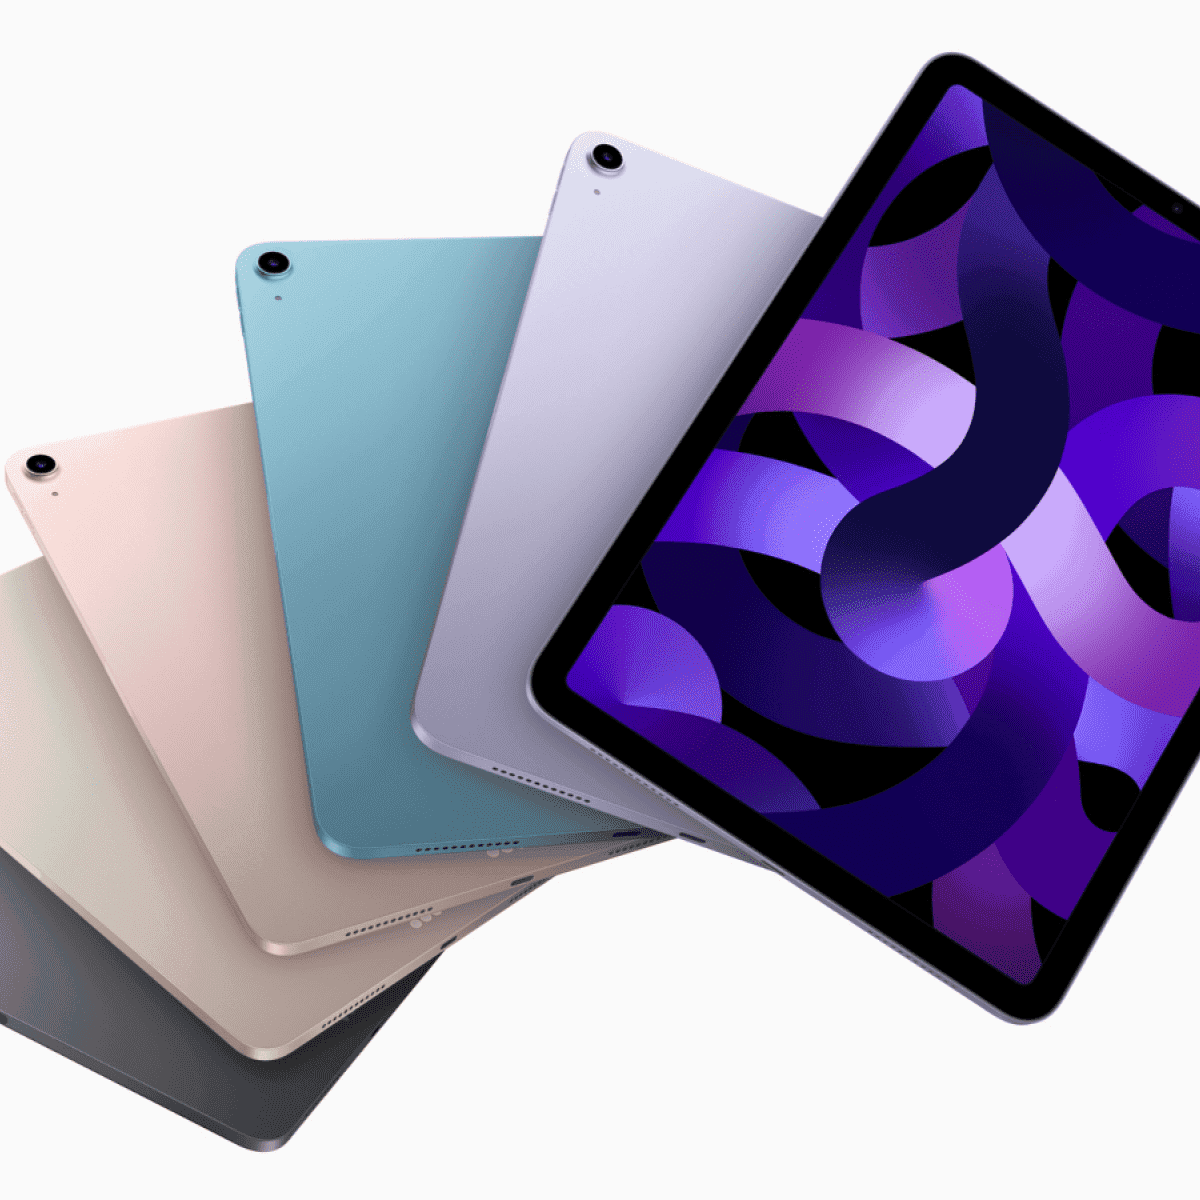 The best iPad to buy in early 2023